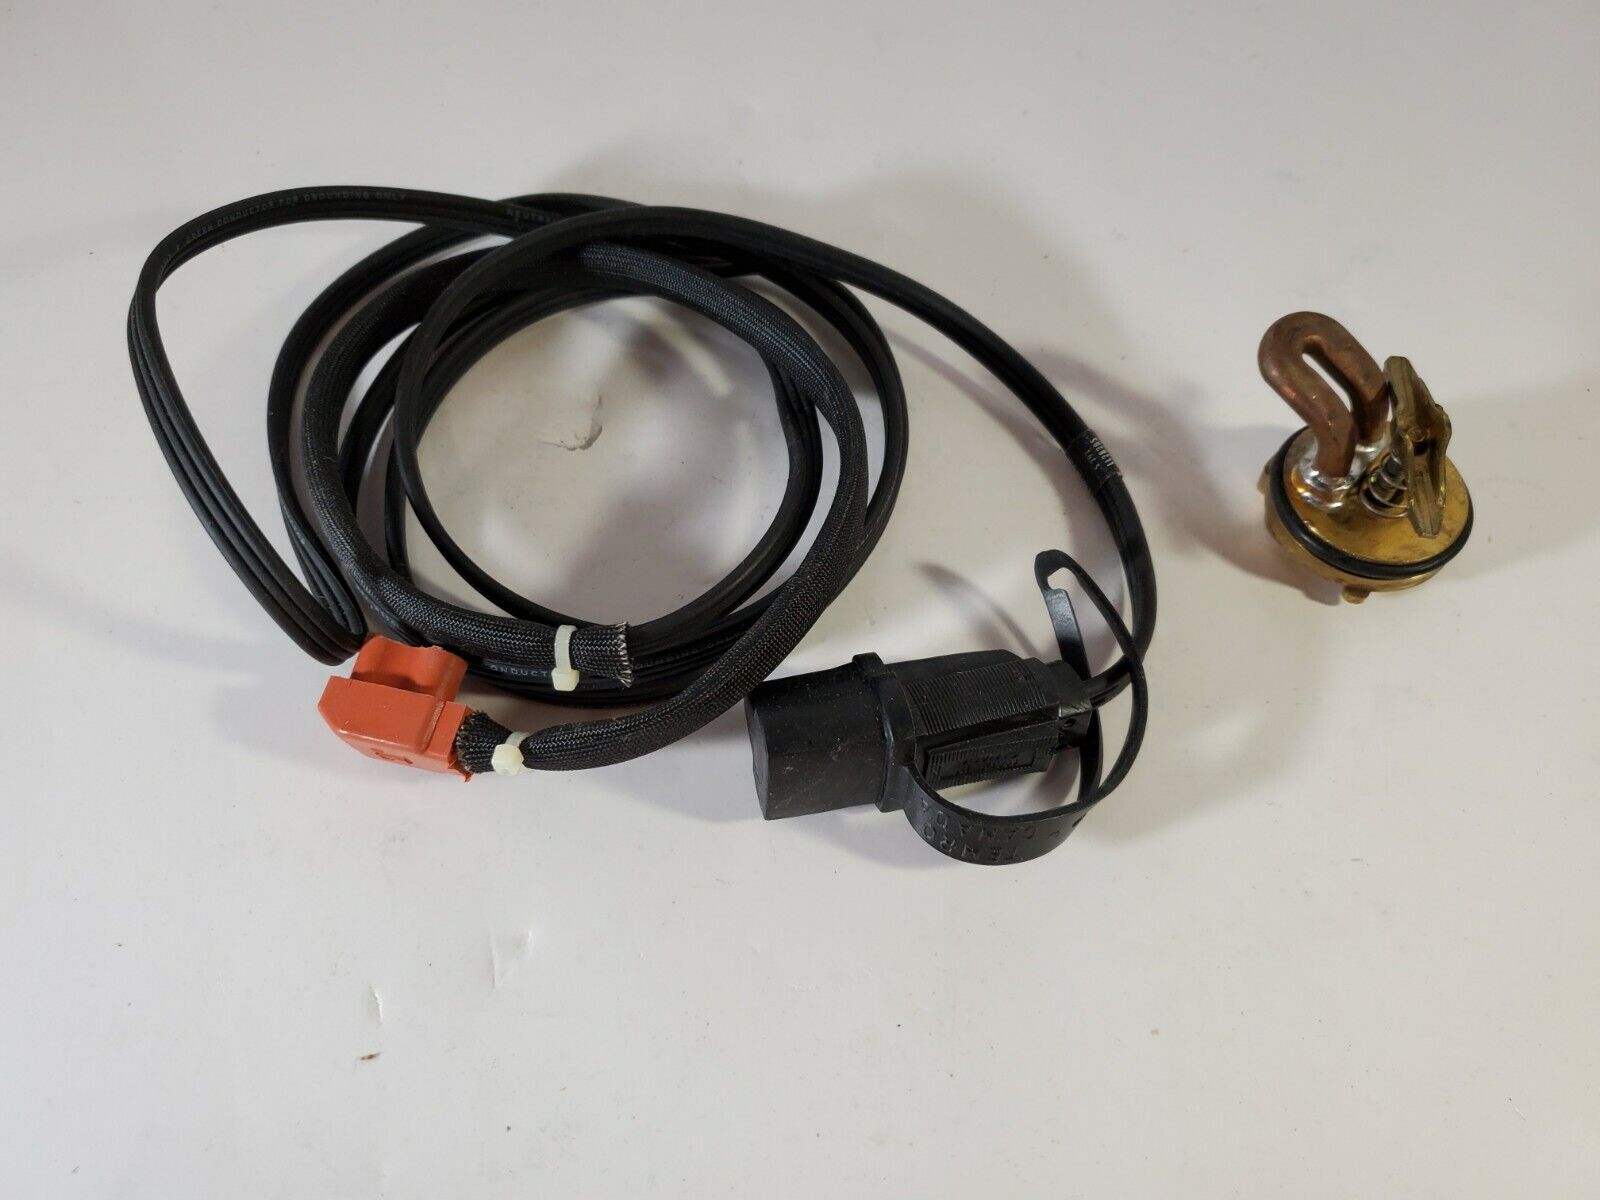 NOS - ENGINE BLOCK HEATER GM# 998956 FOR SELECT 85-91 GM VEHICLES